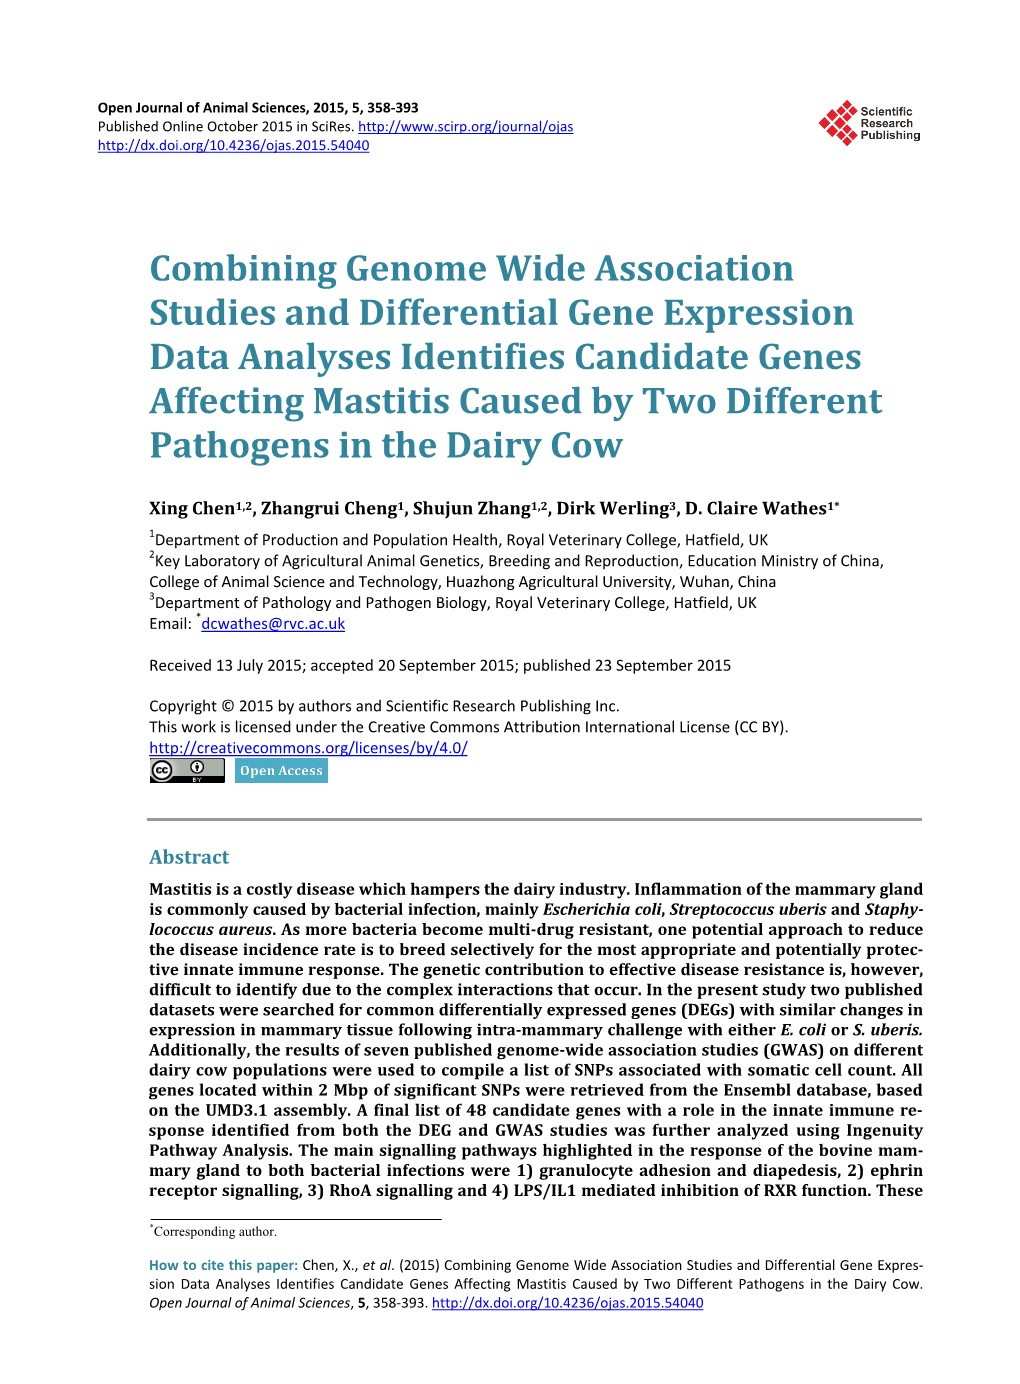 Combining Genome Wide Association Studies and Differential Gene